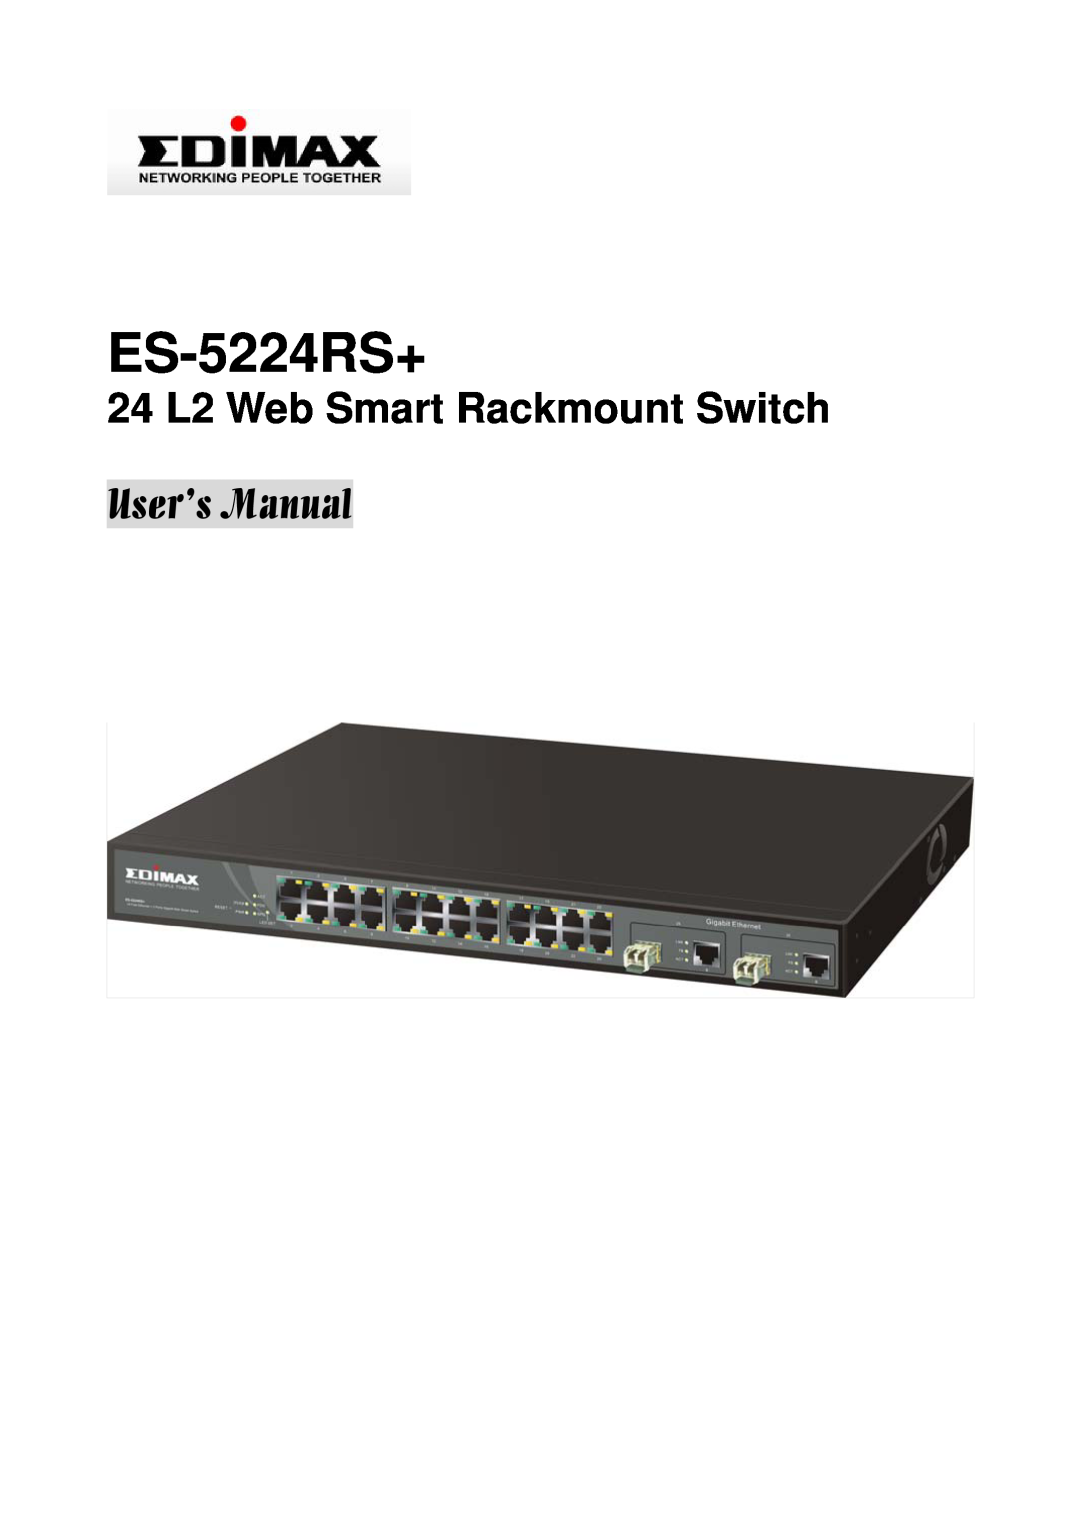 Edimax Technology ES-5224RS+ user manual 24 L2 Web Smart Rackmount Switch, User’s Manual 